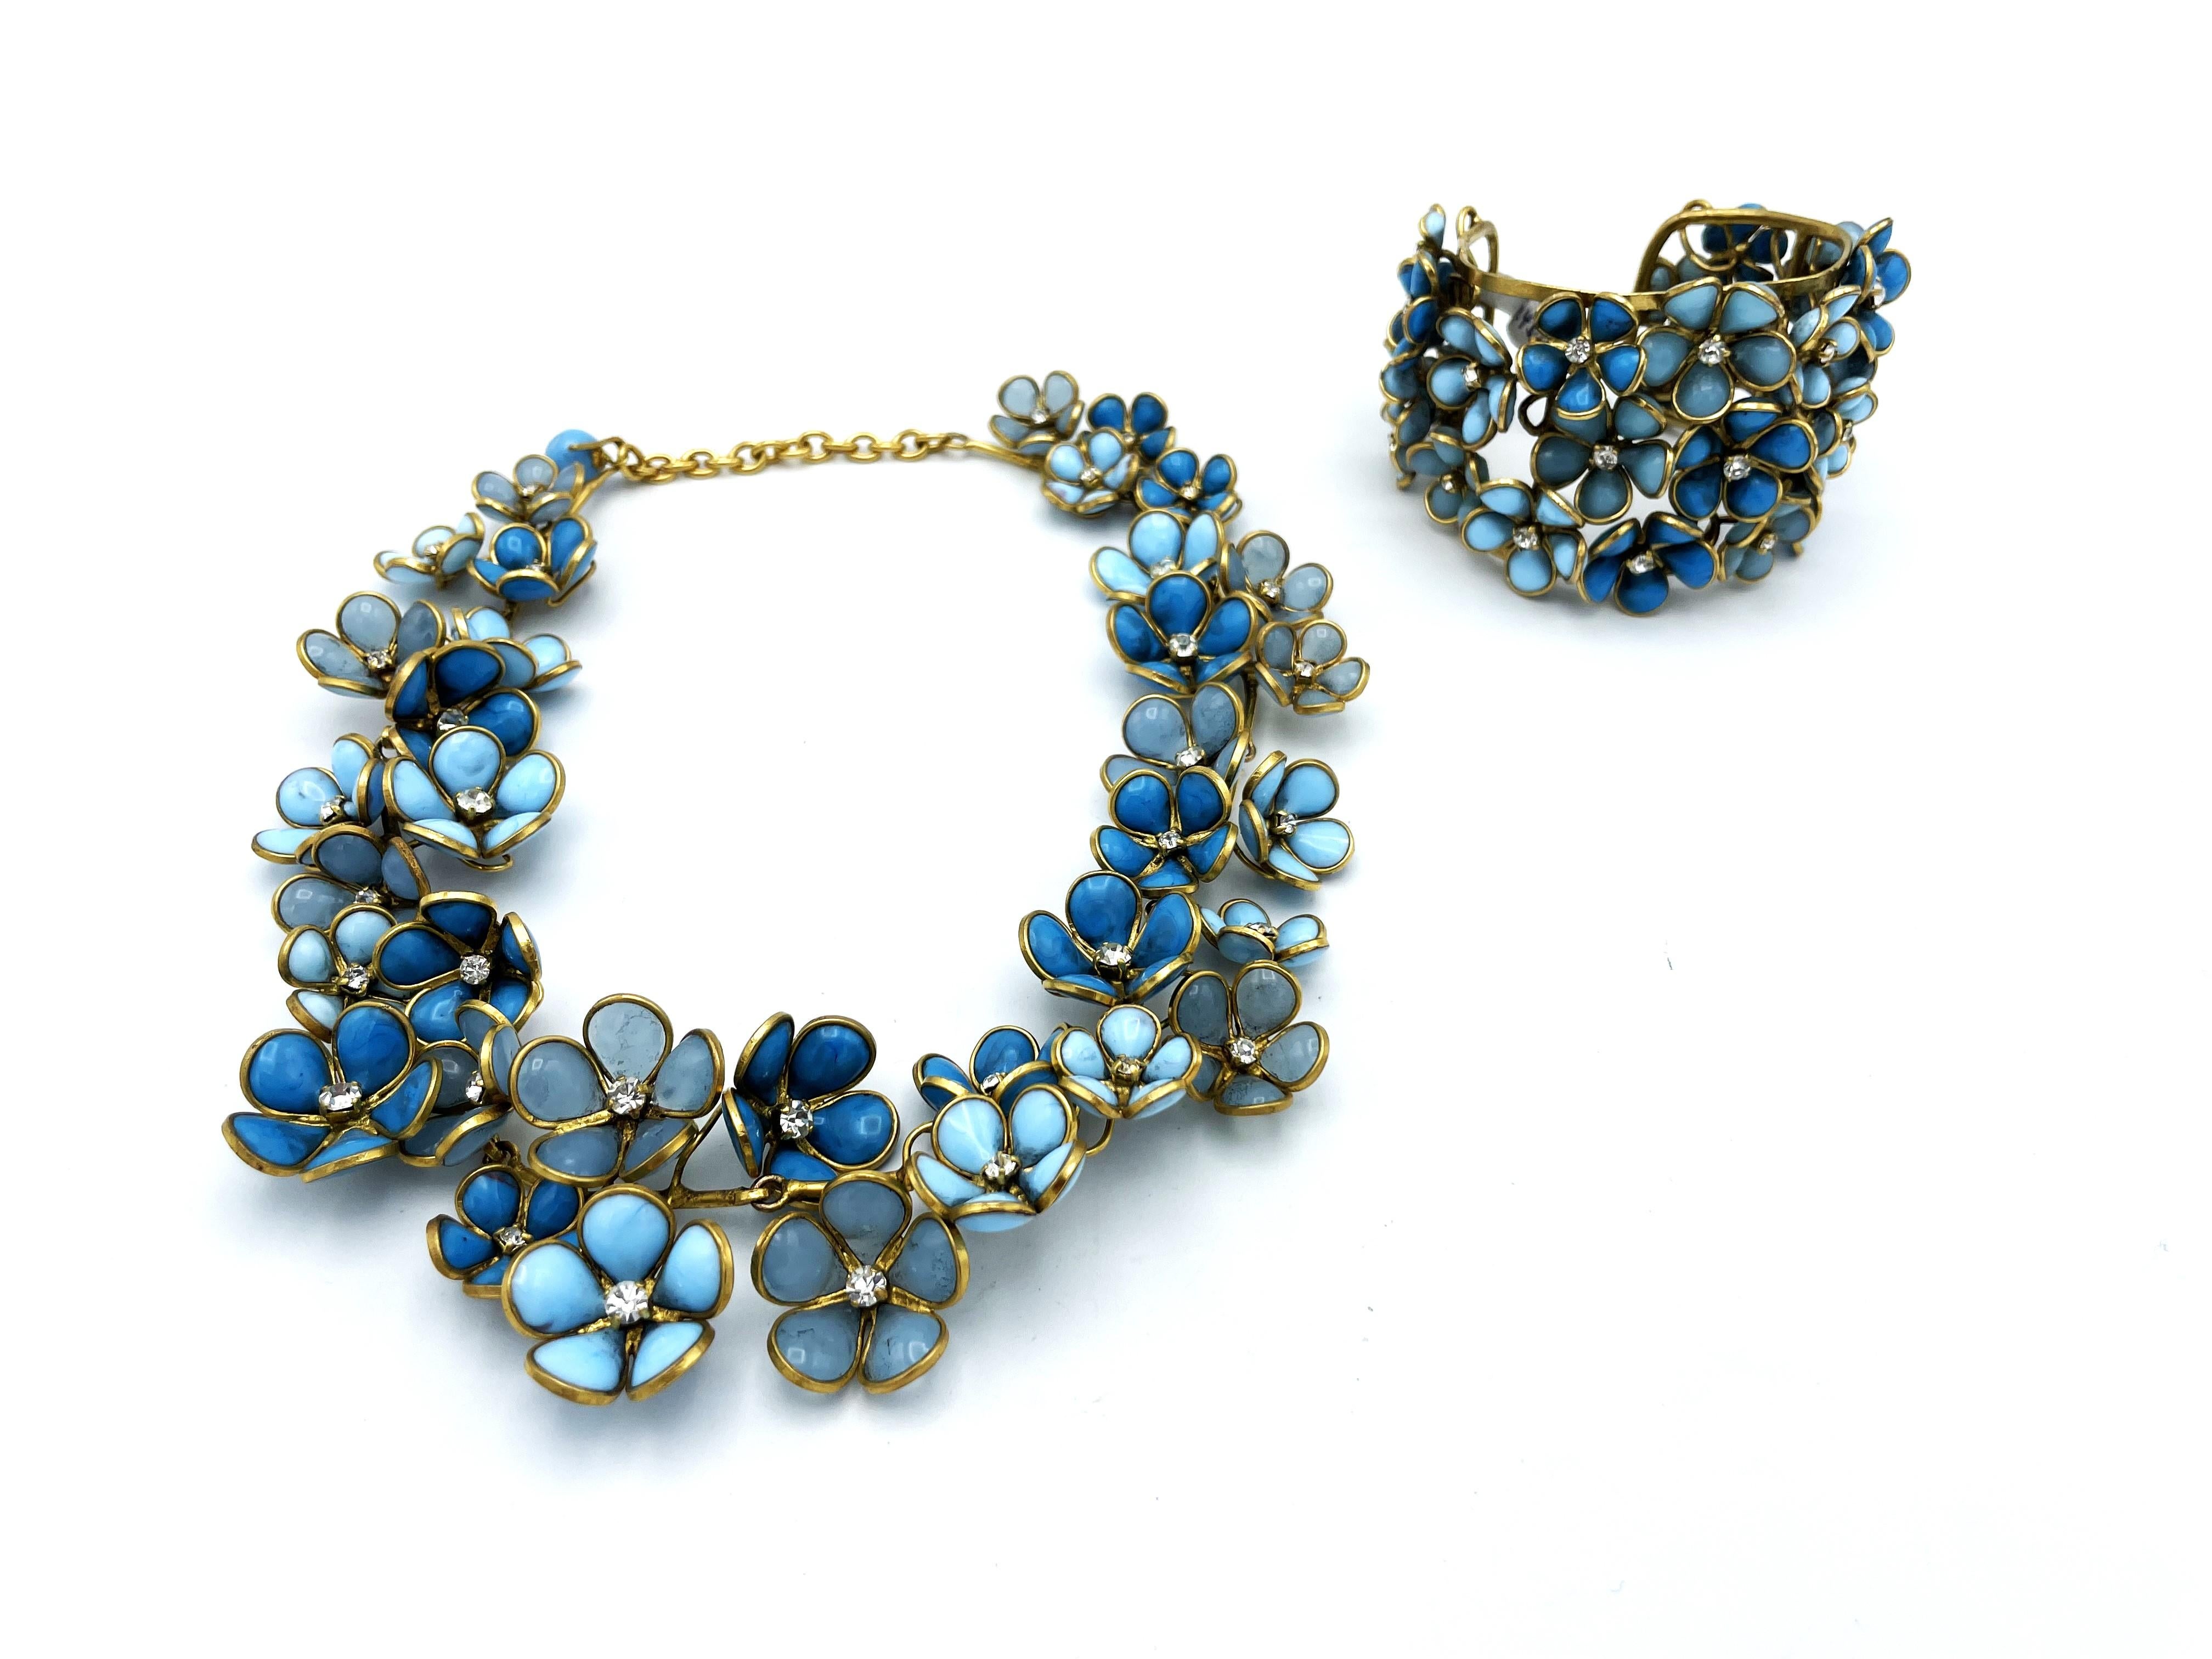 Necklace of many blue glass flowers from Gripoix in the style of Chanel For Sale 4